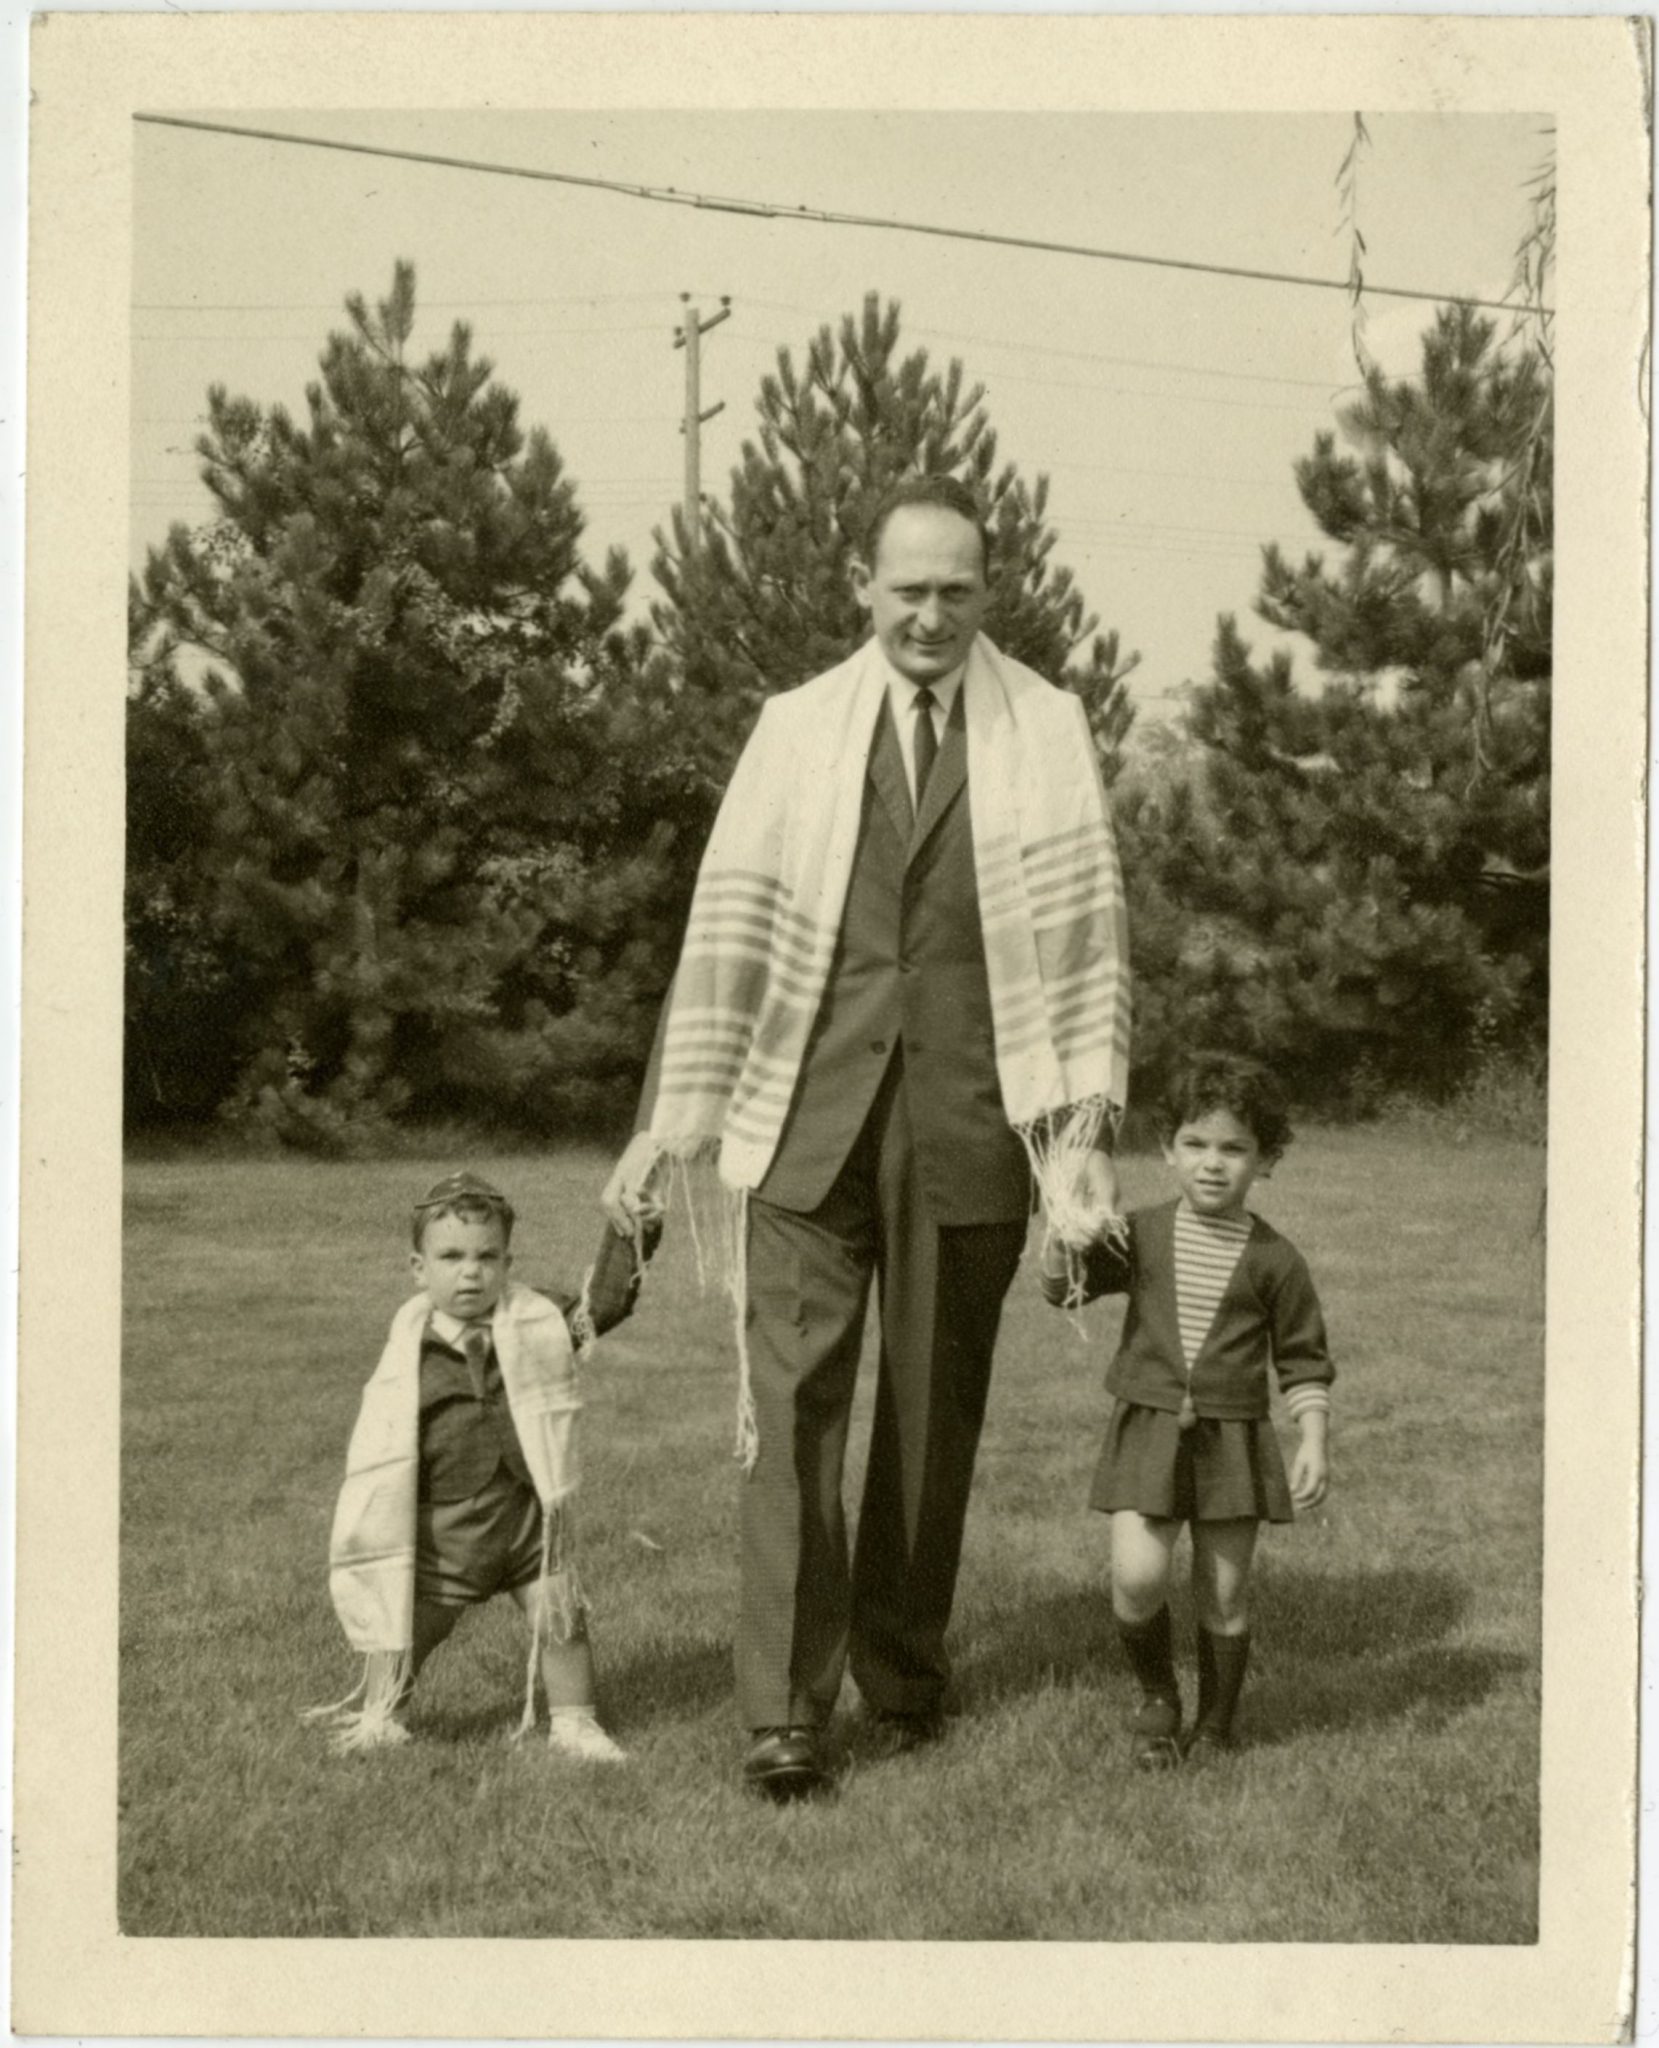 Percy Skuy with his children